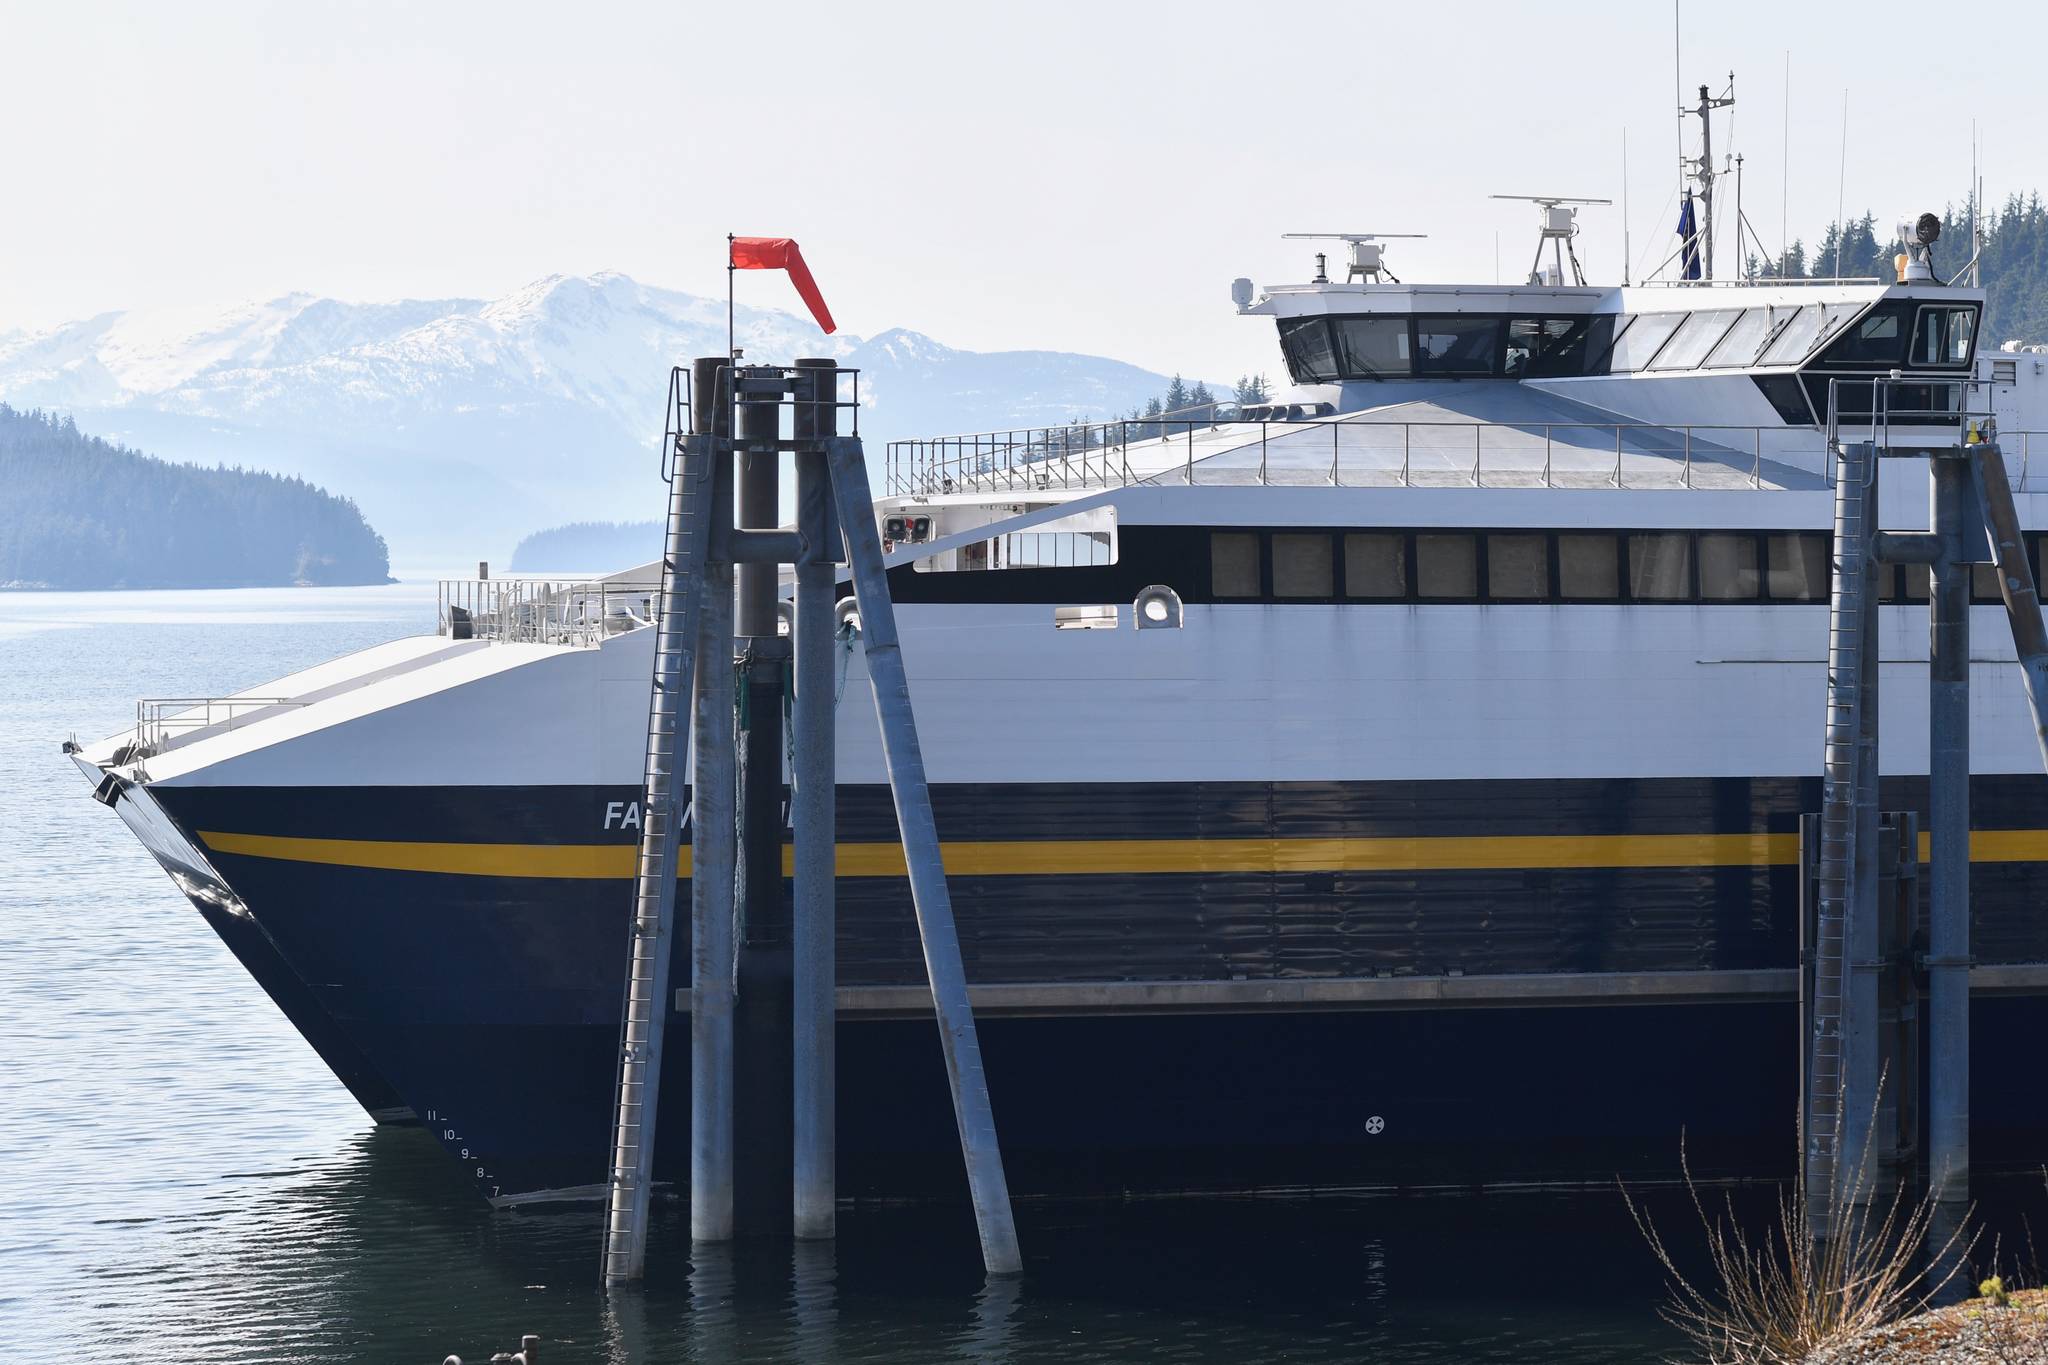 Opinion: Facts, not tales, tell story of Alaska’s ferry system